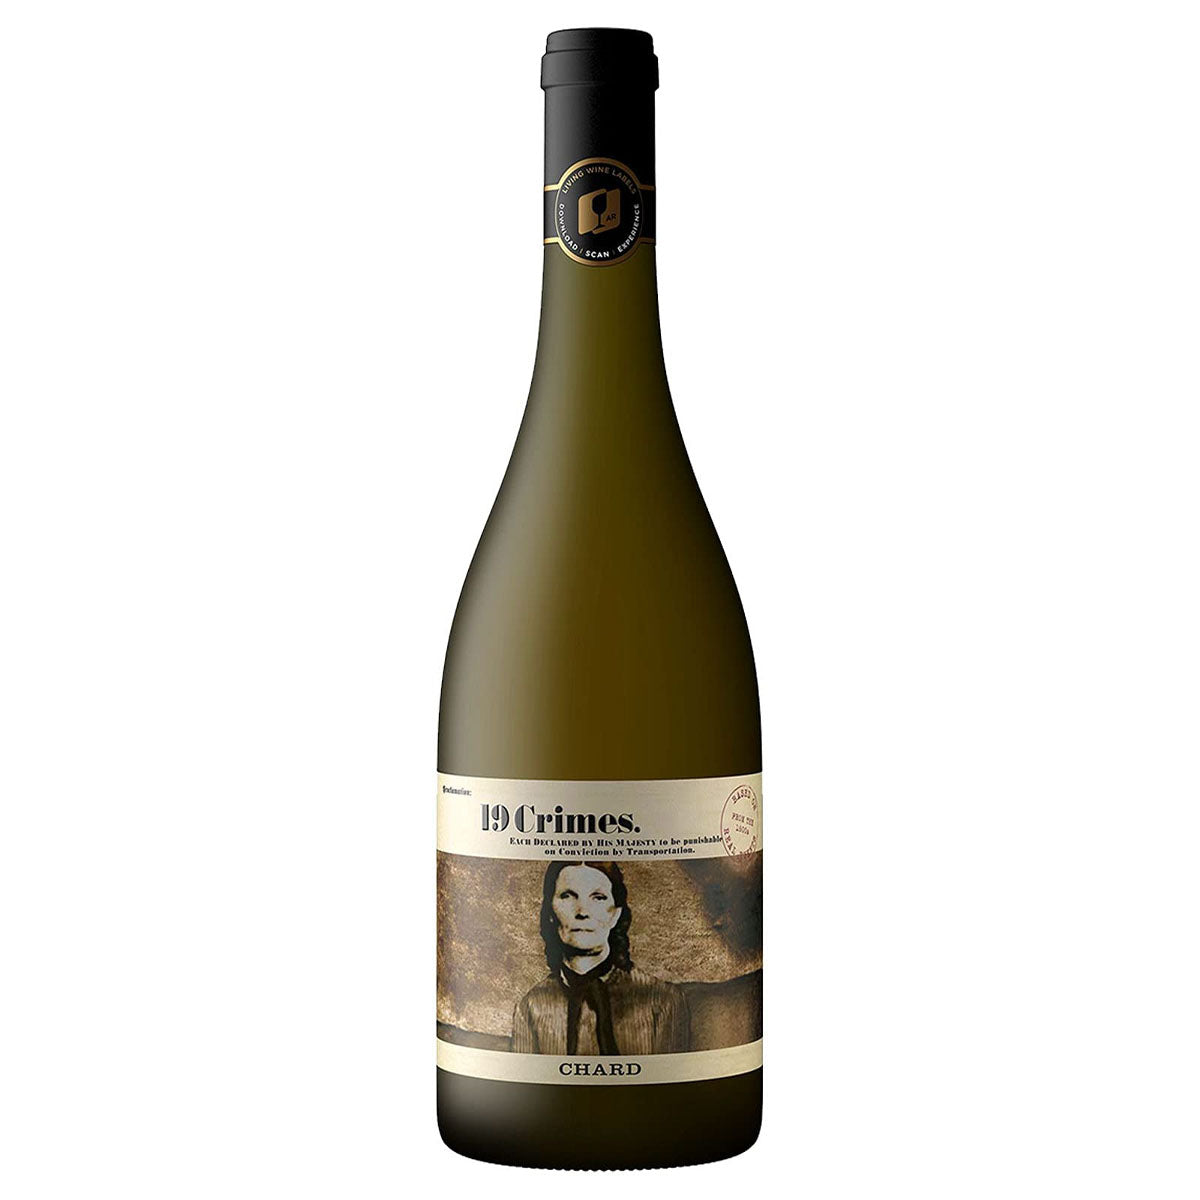 A 19 Crimes - Chardonnay (13% ABV) - 750ml with a picture of a woman.